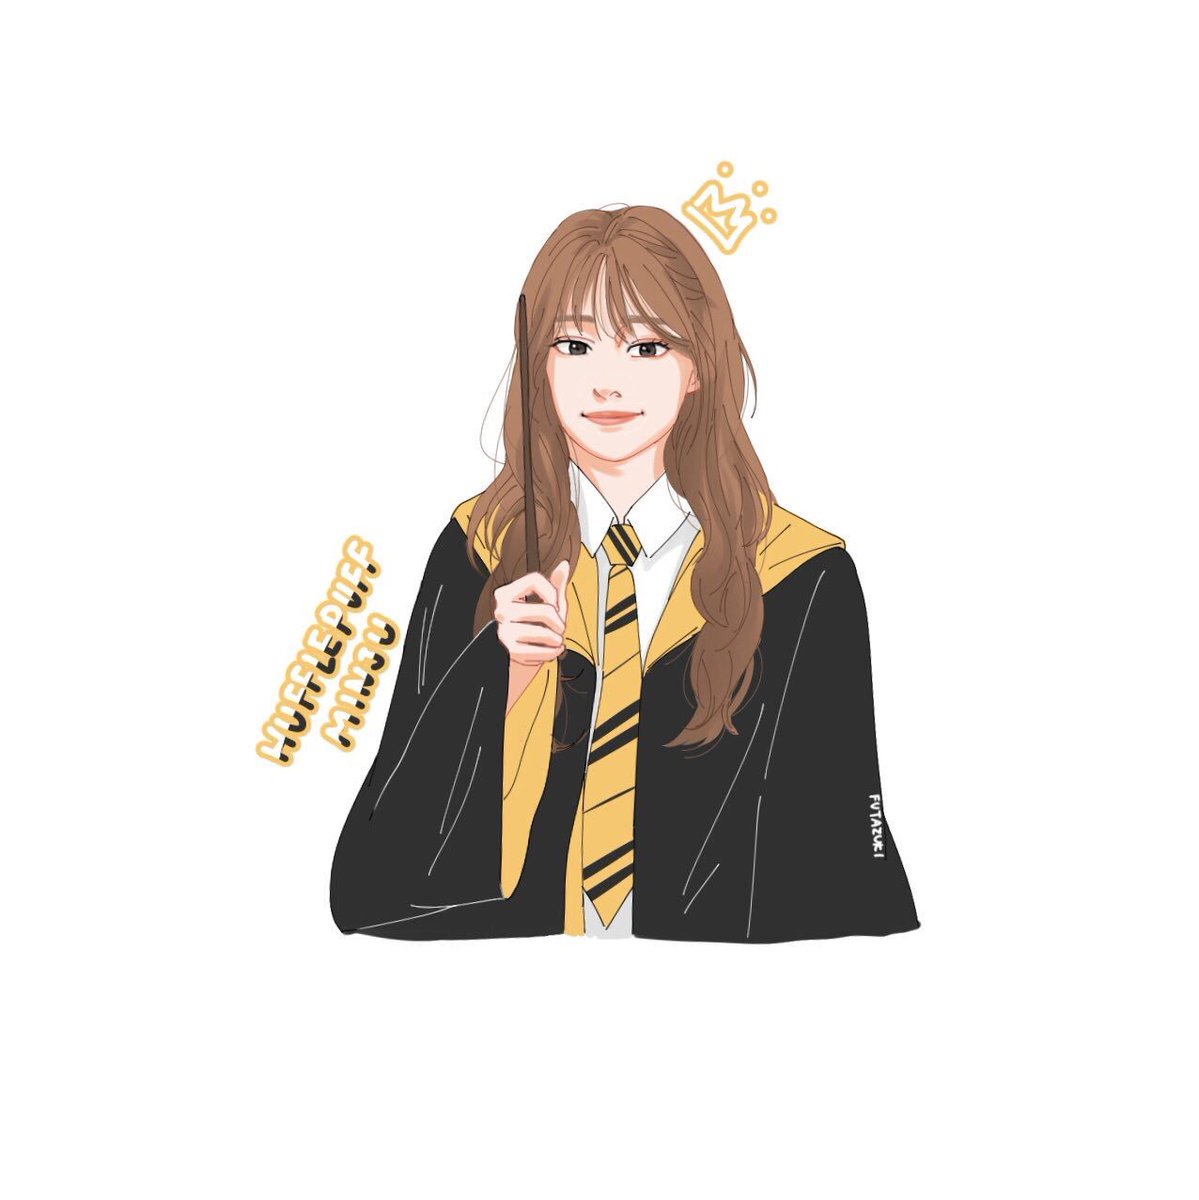 Takes Astronomy and Creature Care classes. Likes to imitate the behaviour of creatures, but that practise is often despised by her friends. Known to be the nicest Hufflepuff among all. #KimMinju  #김민주  #キムミンジュ